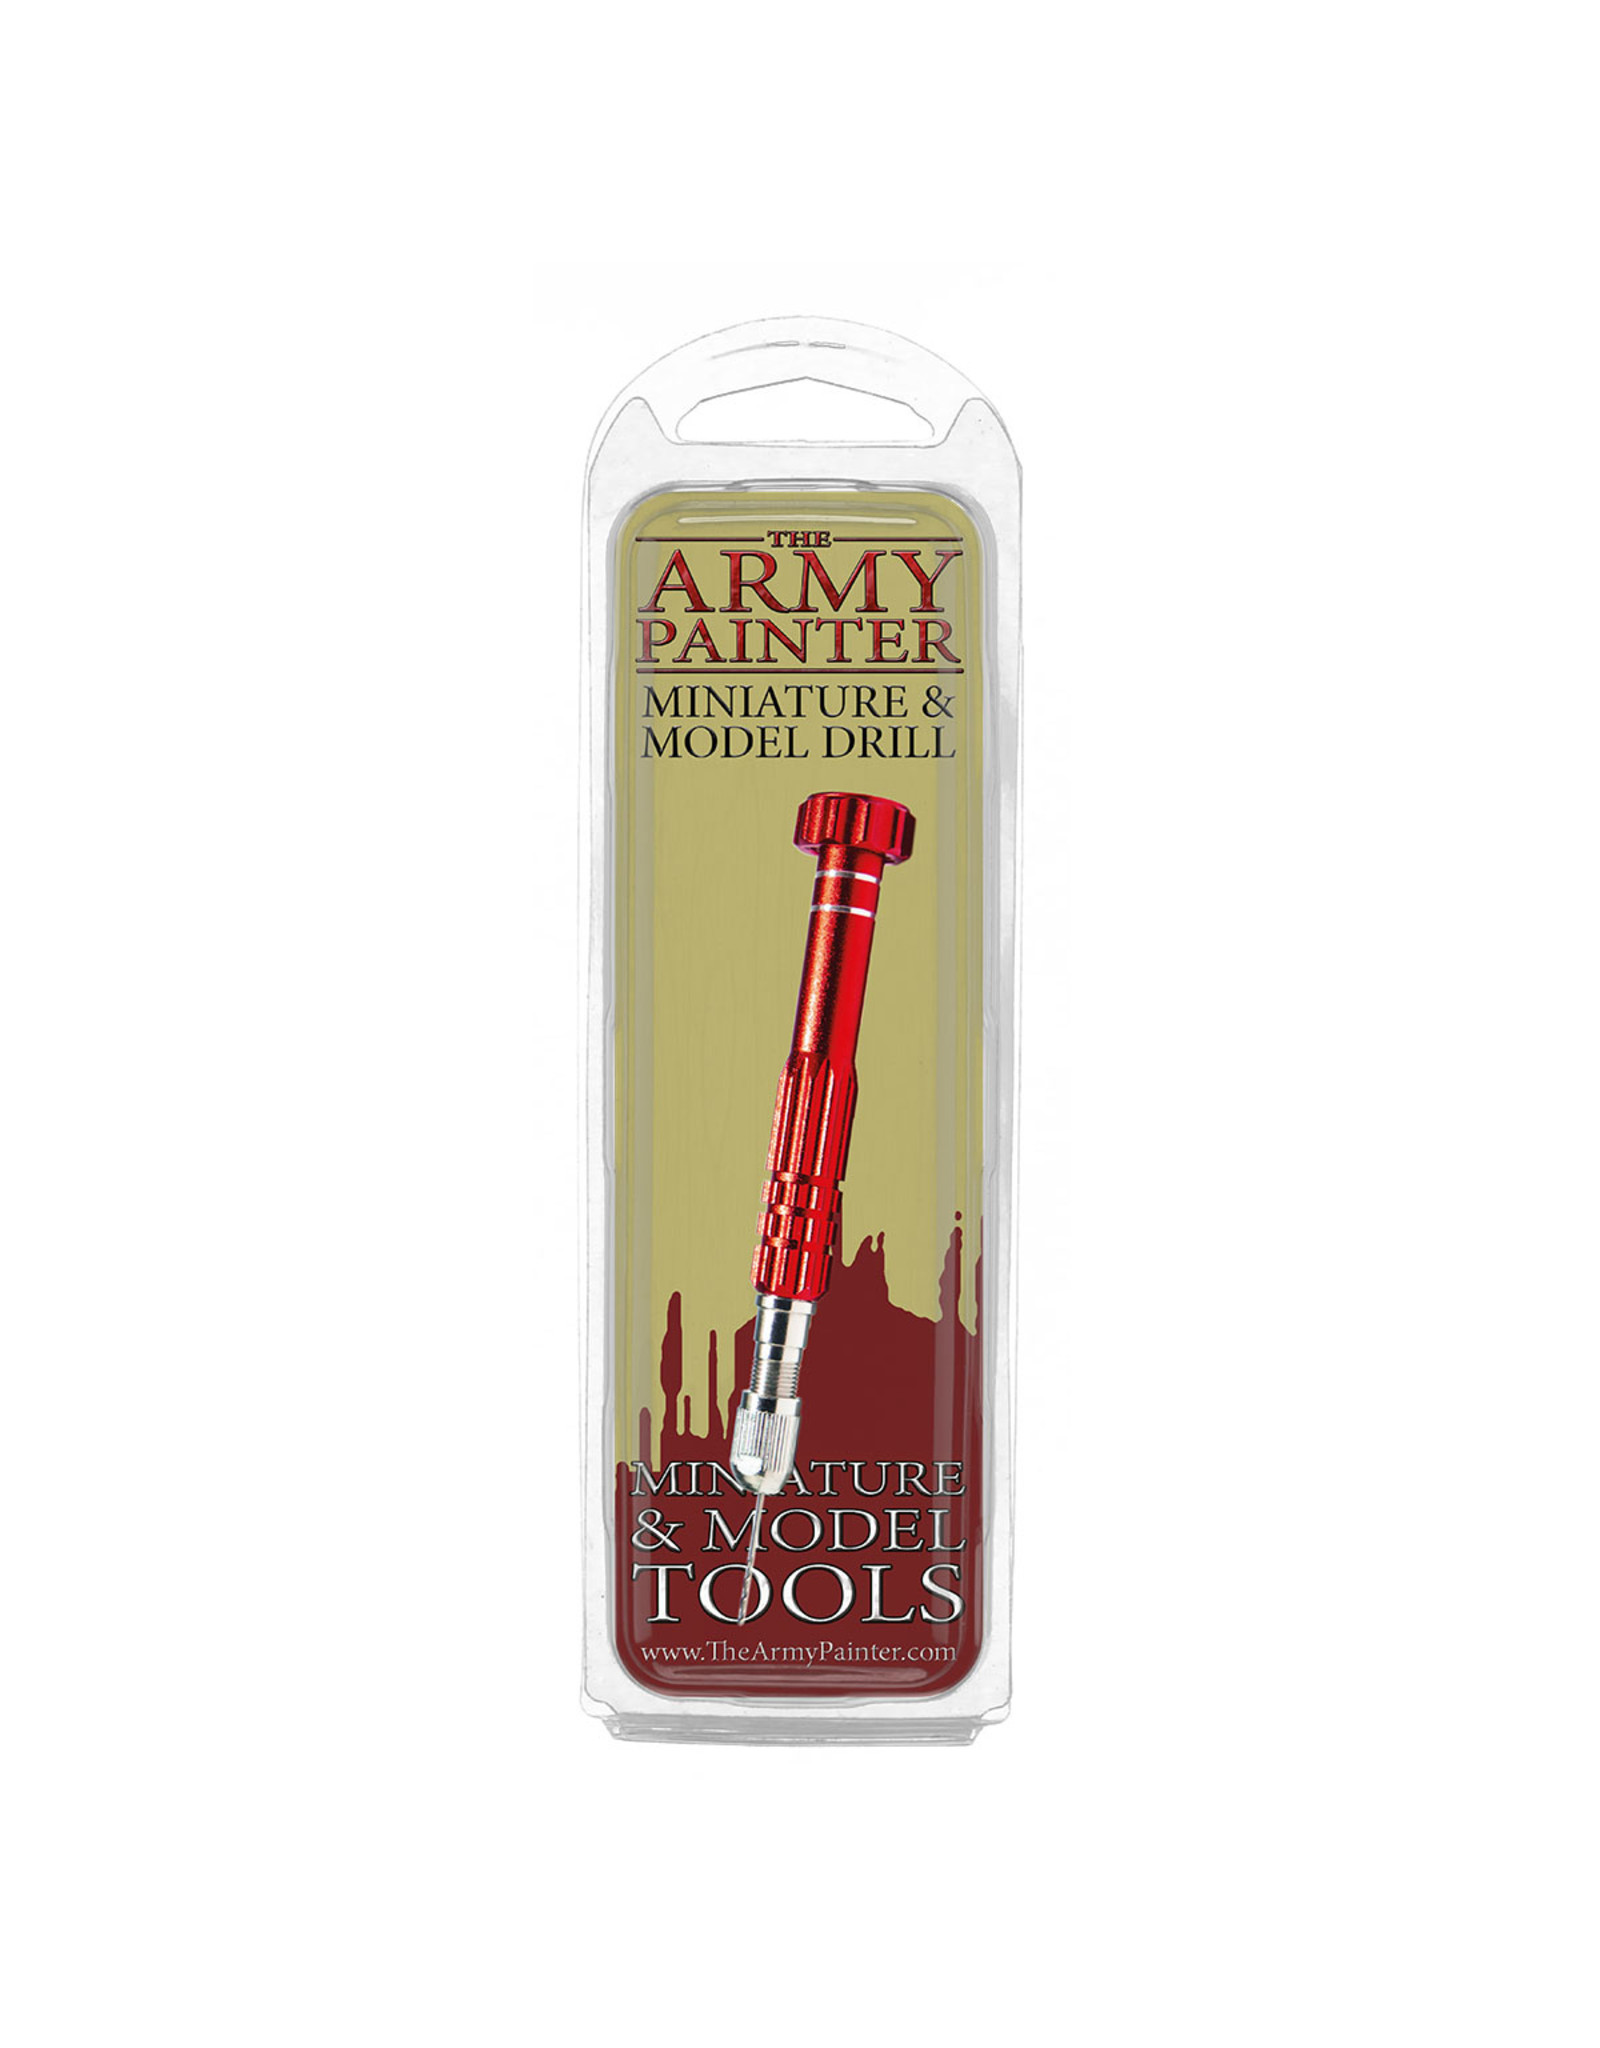 The Army Painter The Army Painter Miniature and Model Drill